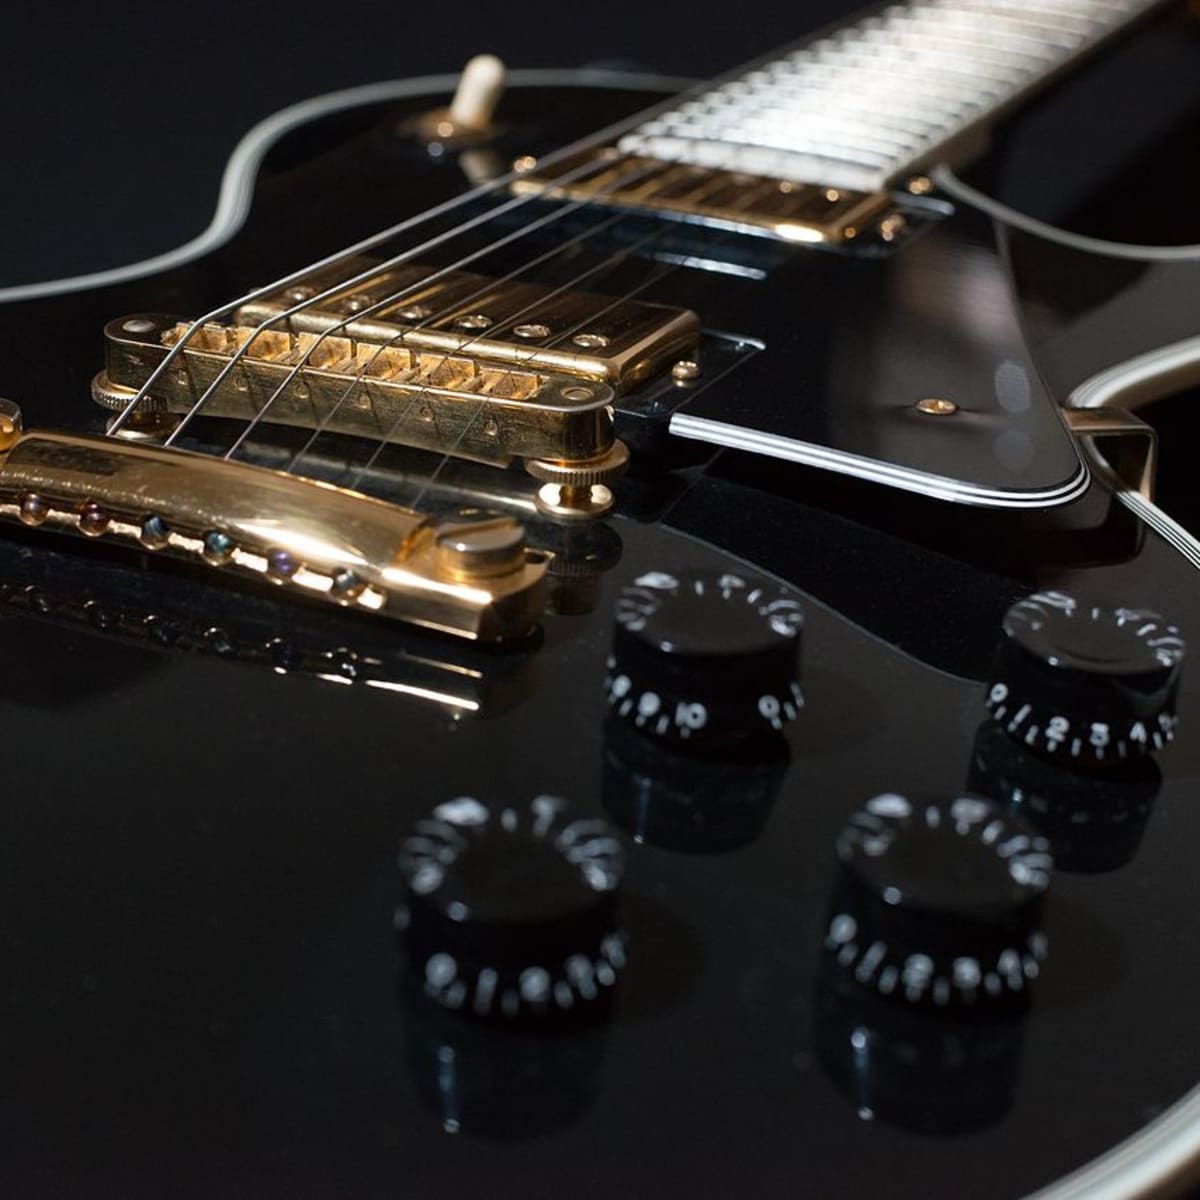 koppel Indirect Trots Epiphone Les Paul Custom PRO Guitar Review - Spinditty